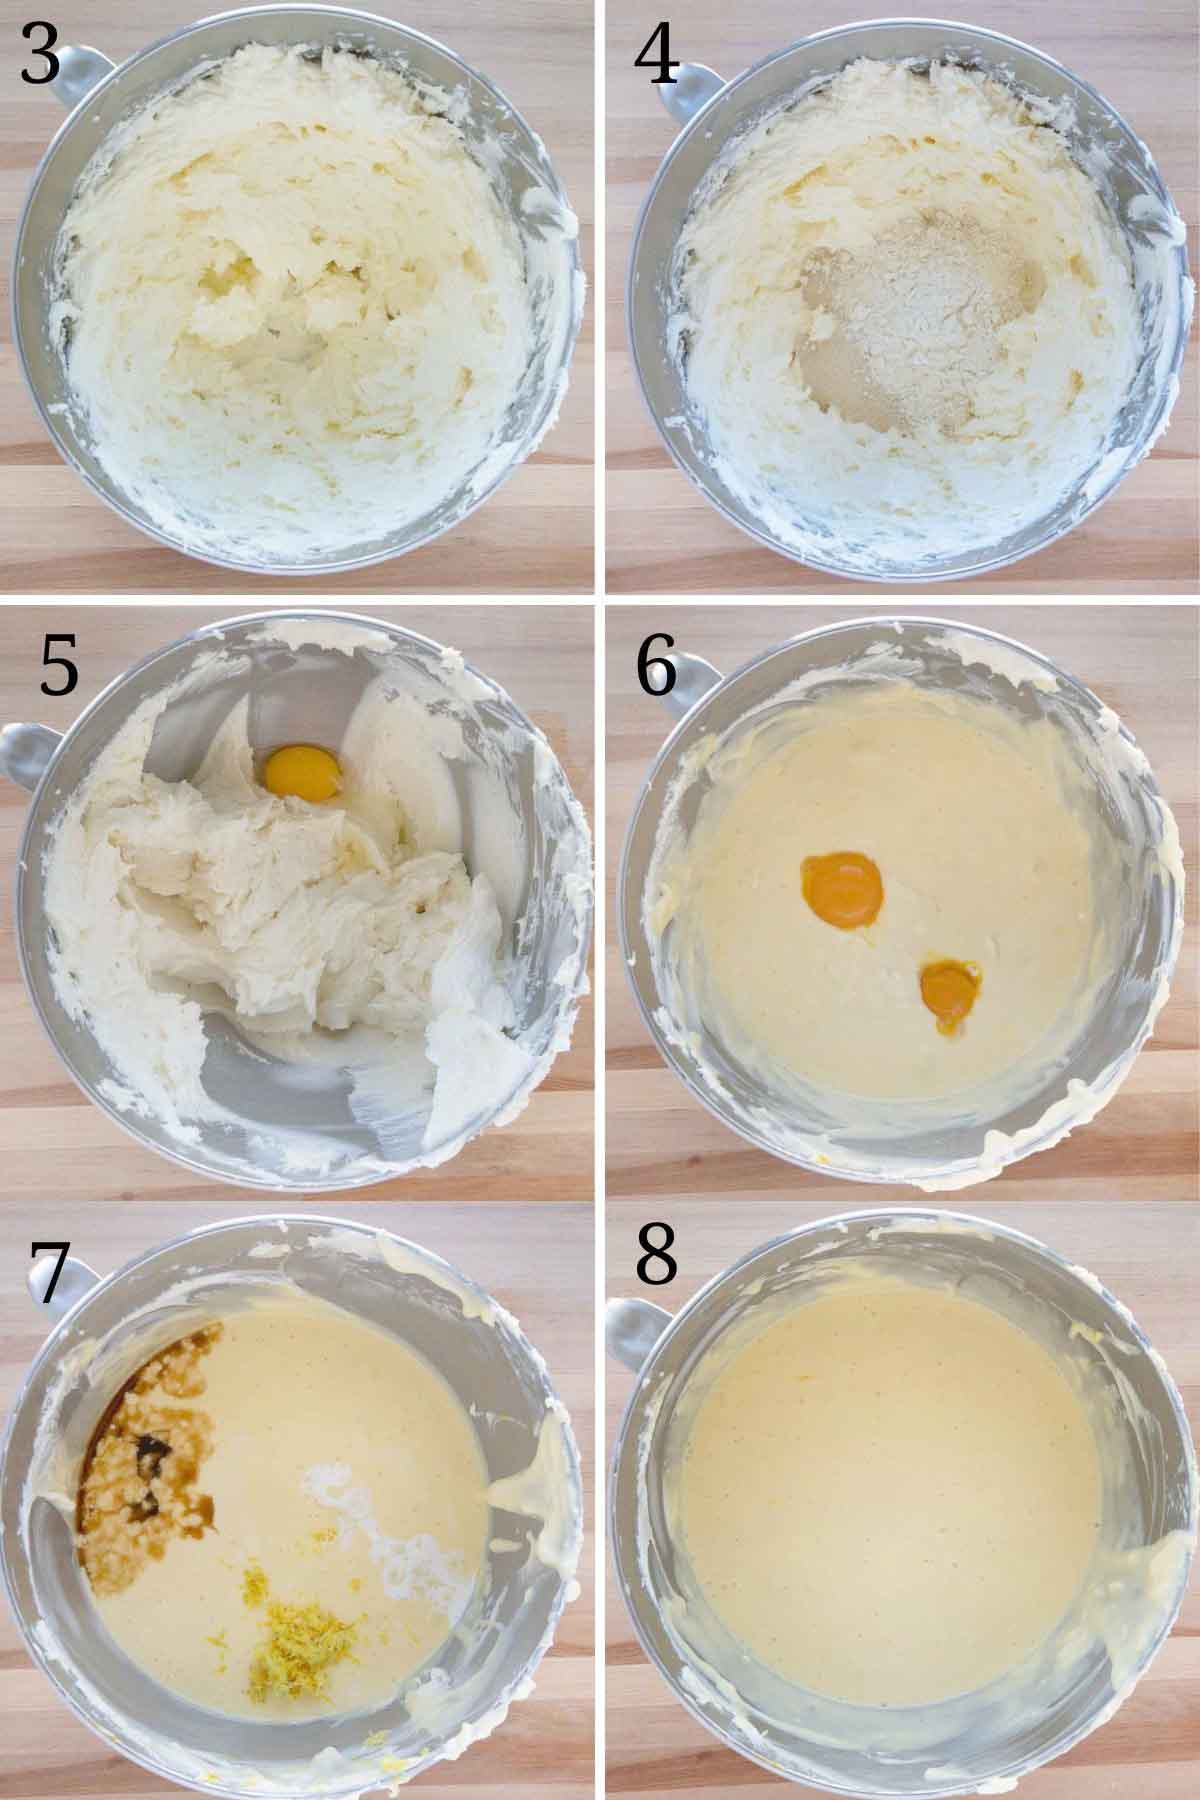 six images showing how to make cheesecake batter.